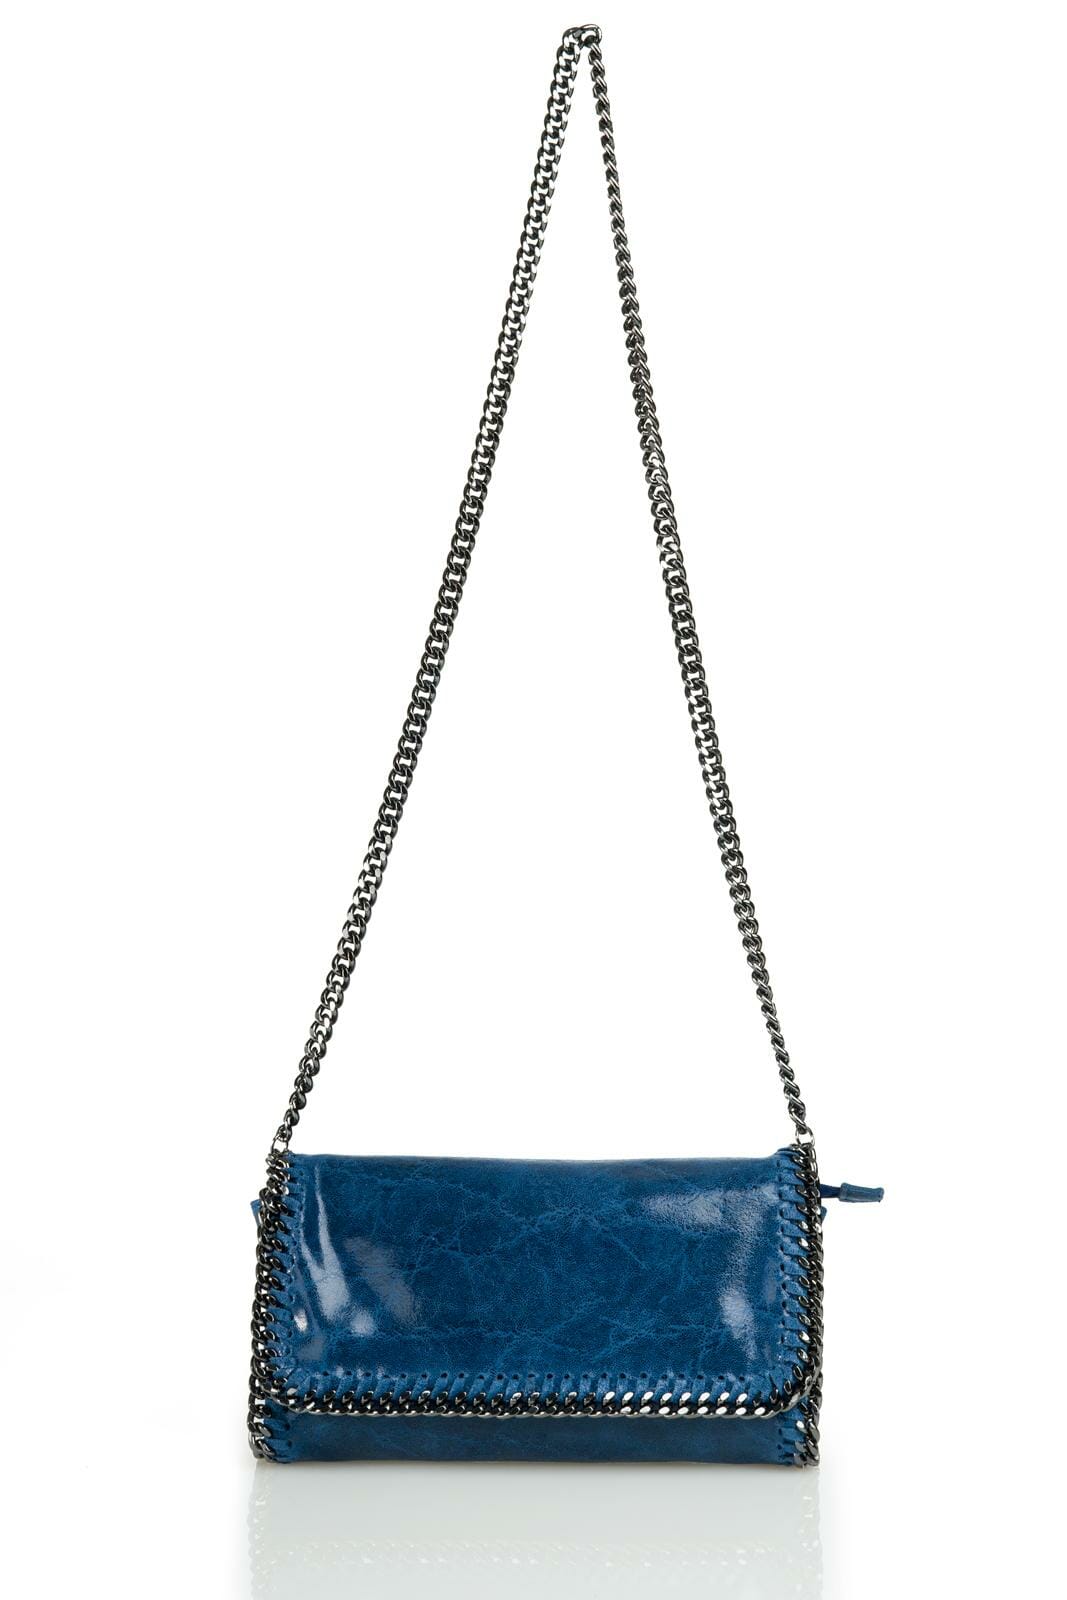 Venecia Clutch in Genuine Suede with Silver Chain - BLUE JEANS